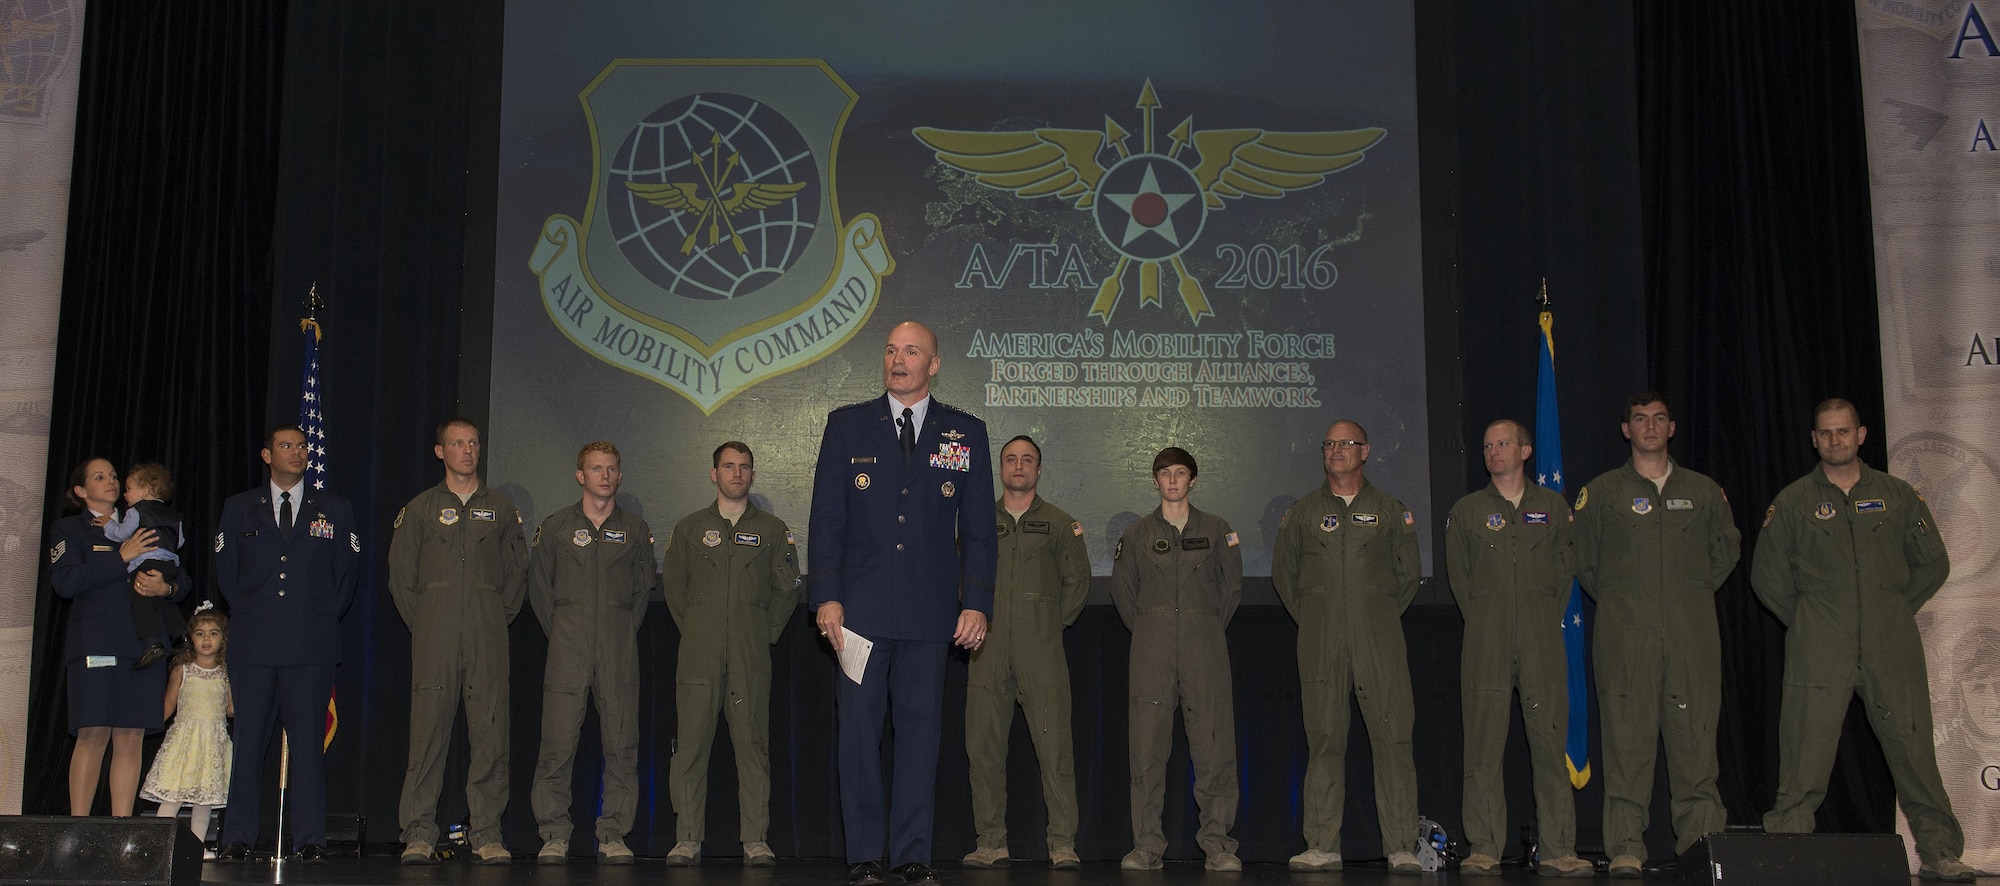 Gen. Carlton D. Everhart II, Air Mobility Command commander, thanks the air mobility community for their dedication to the Rapid Global Mobility mission during his keynote speech at the 48th annual Air Mobility Command and Airlift/Tanker Association Symposium in Nashville, Tennessee, Oct. 29, 2016. The symposium served as a key professional development forum for Mobility Air Forces Airmen by enabling direct access to senior mobility leaders. (U.S. Air Force photo by Senior Airman Megan Friedl)